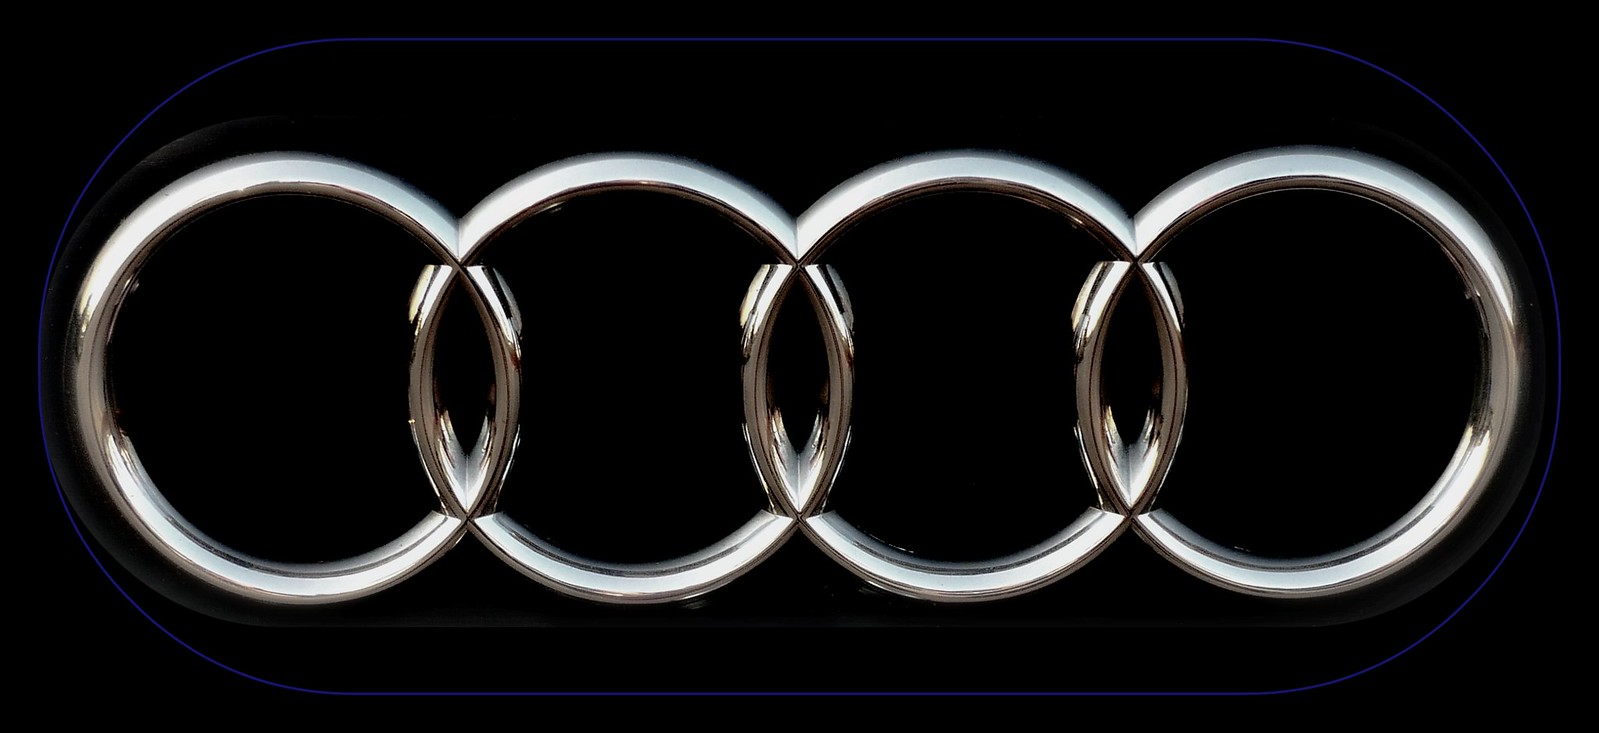 Audi Car Insurance: Which Model and Insurer Are Cheapest? - ValuePenguin